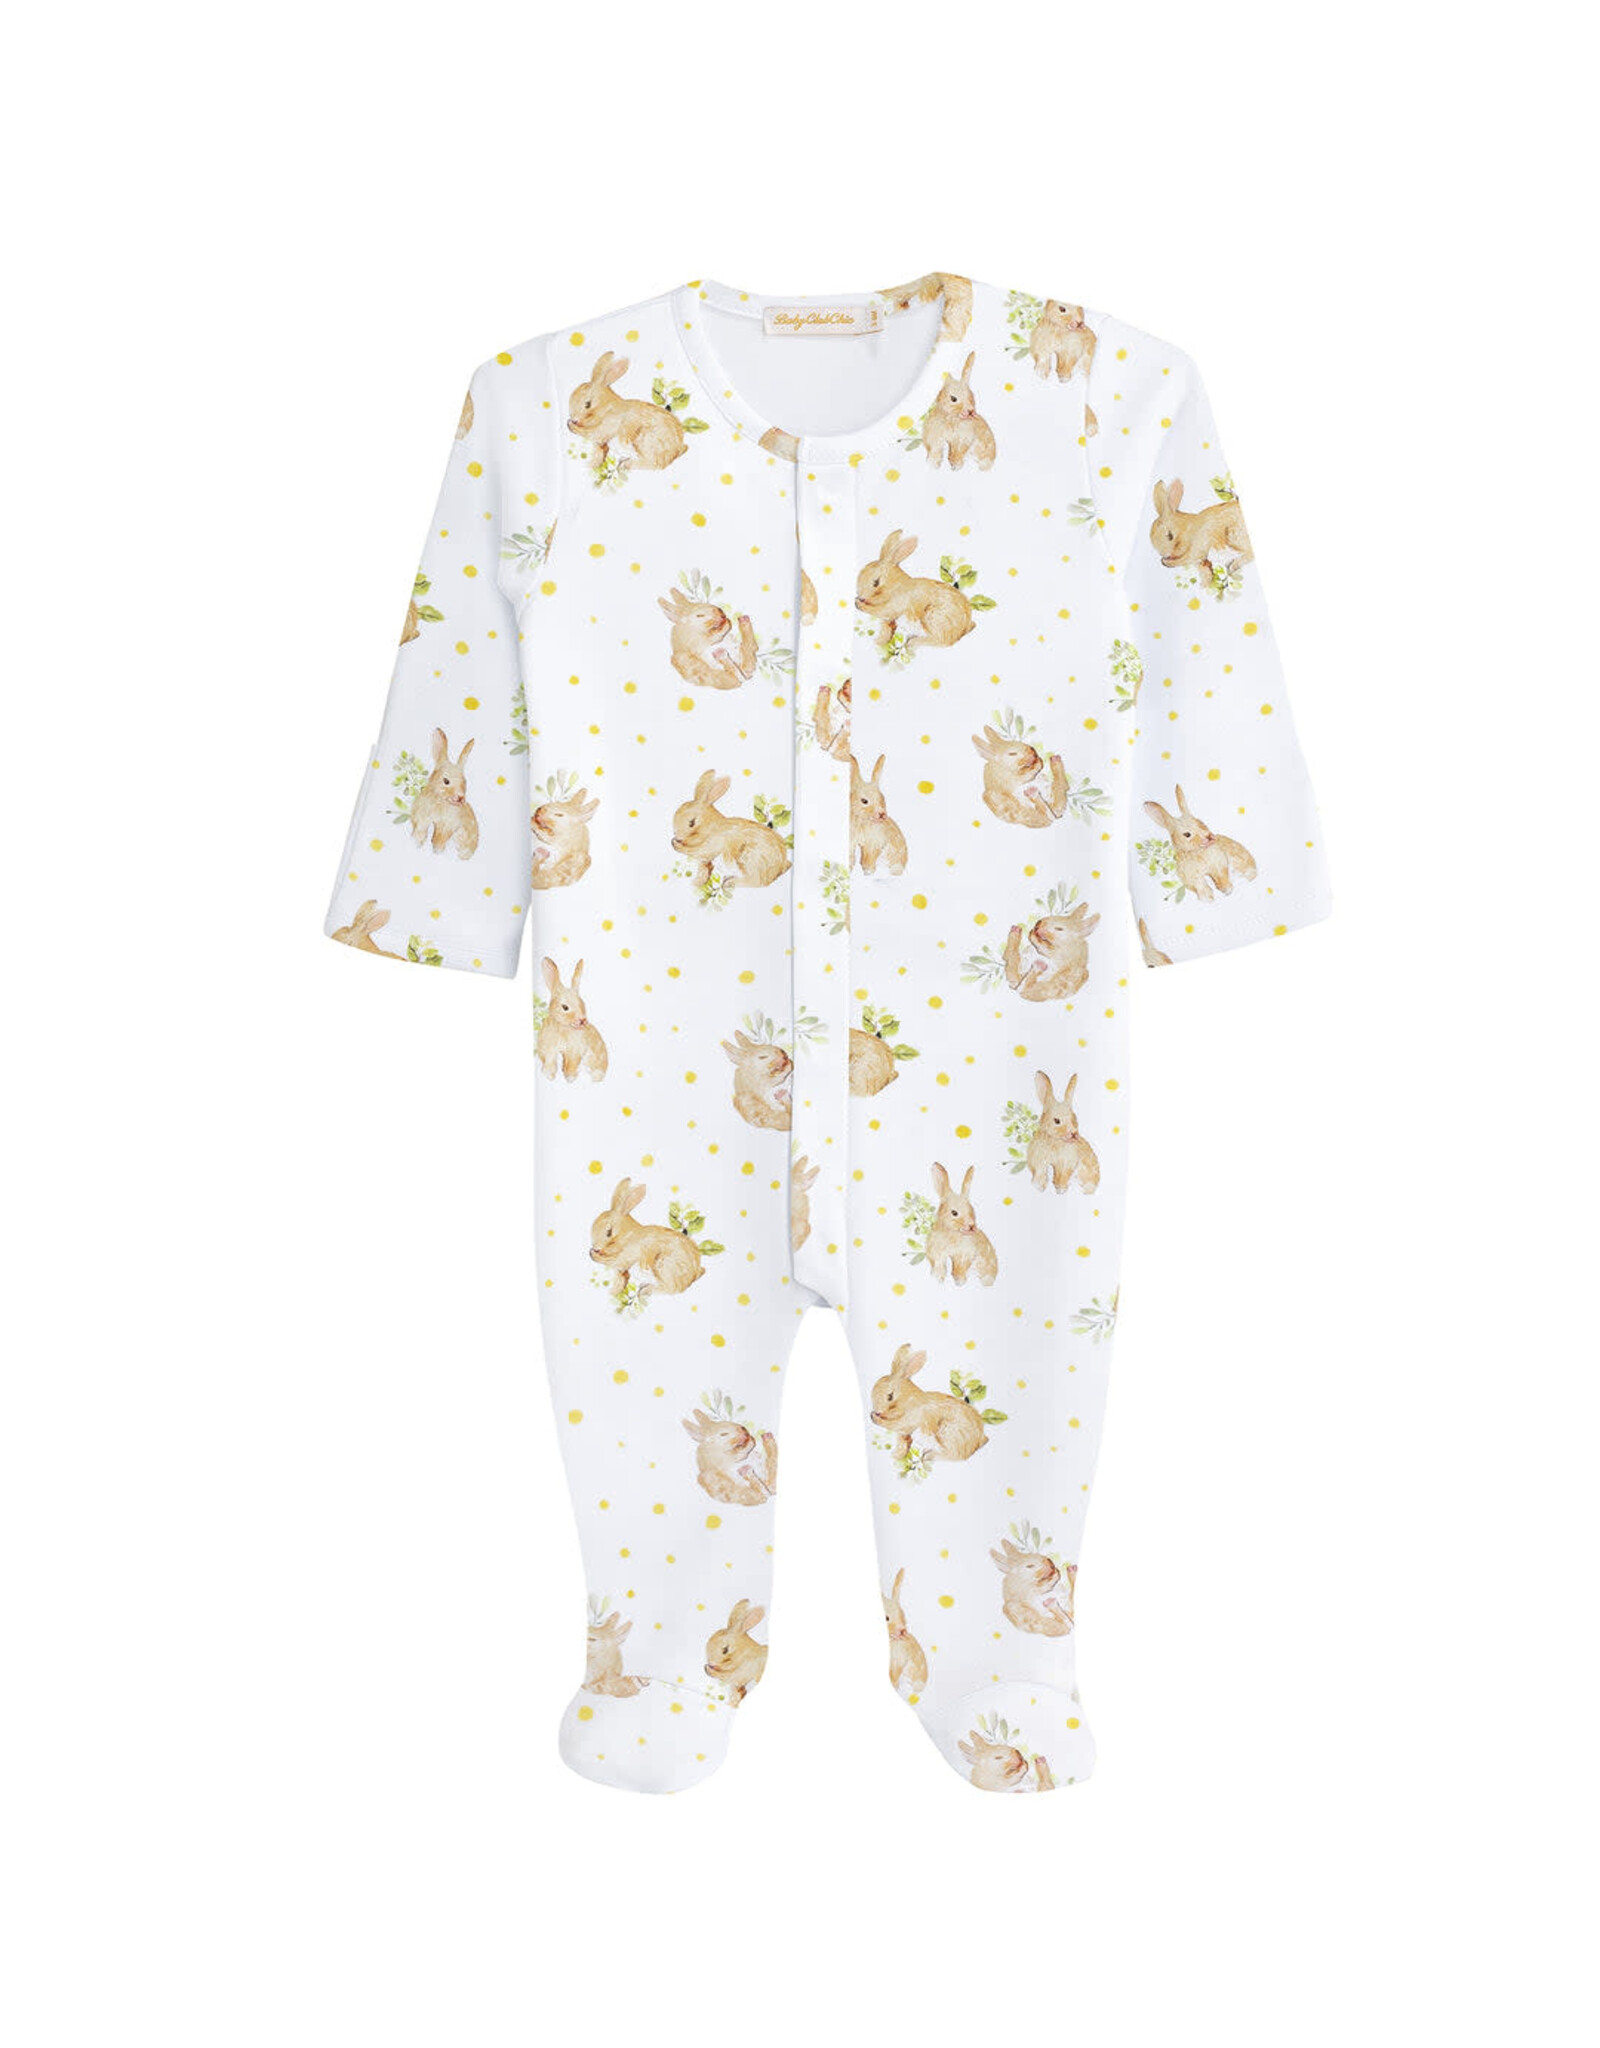 Baby Club Chic Adorable Bunnies Zipped Footie